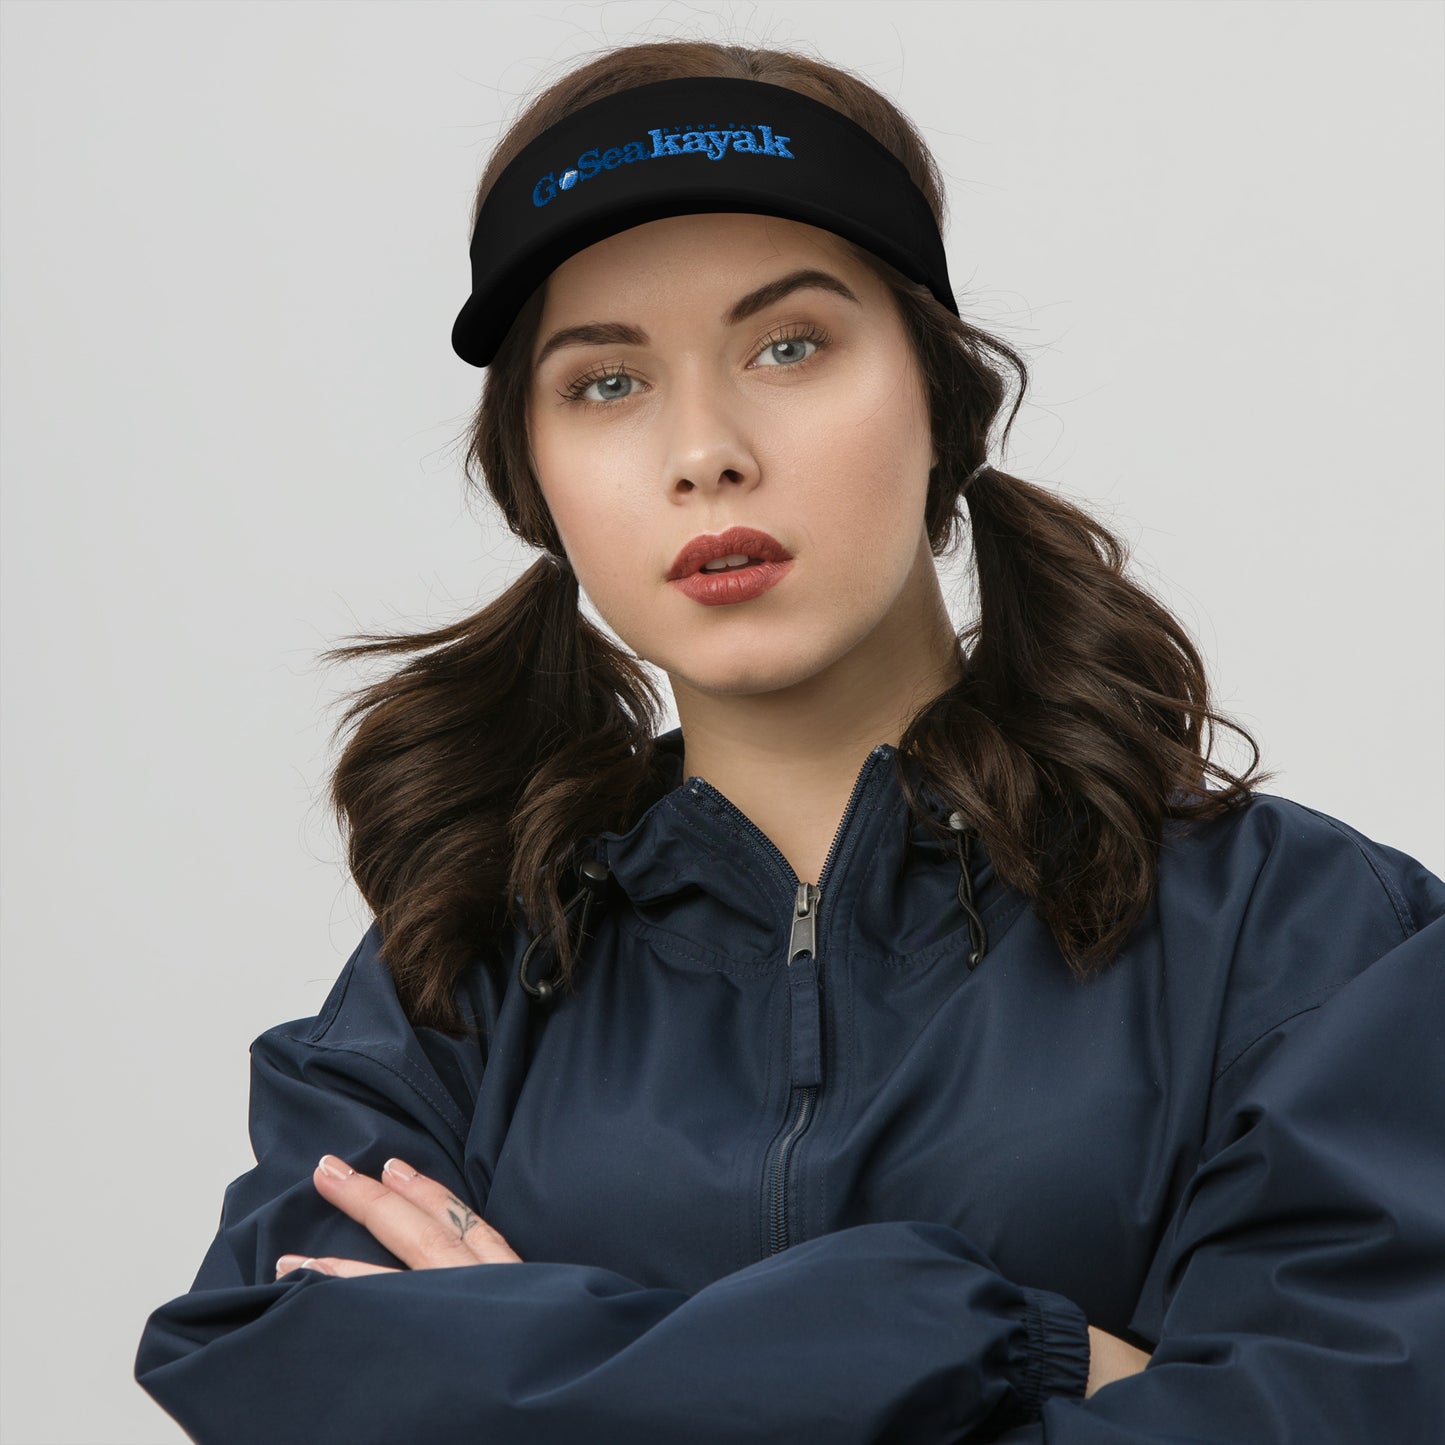  Visor - Black - Front view, on woman standing with arms crossed - Go Sea Kayak Byron bay logo on front - Genuine Byron Bay Merchandise | Produced by Go Sea Kayak Byron Bay 